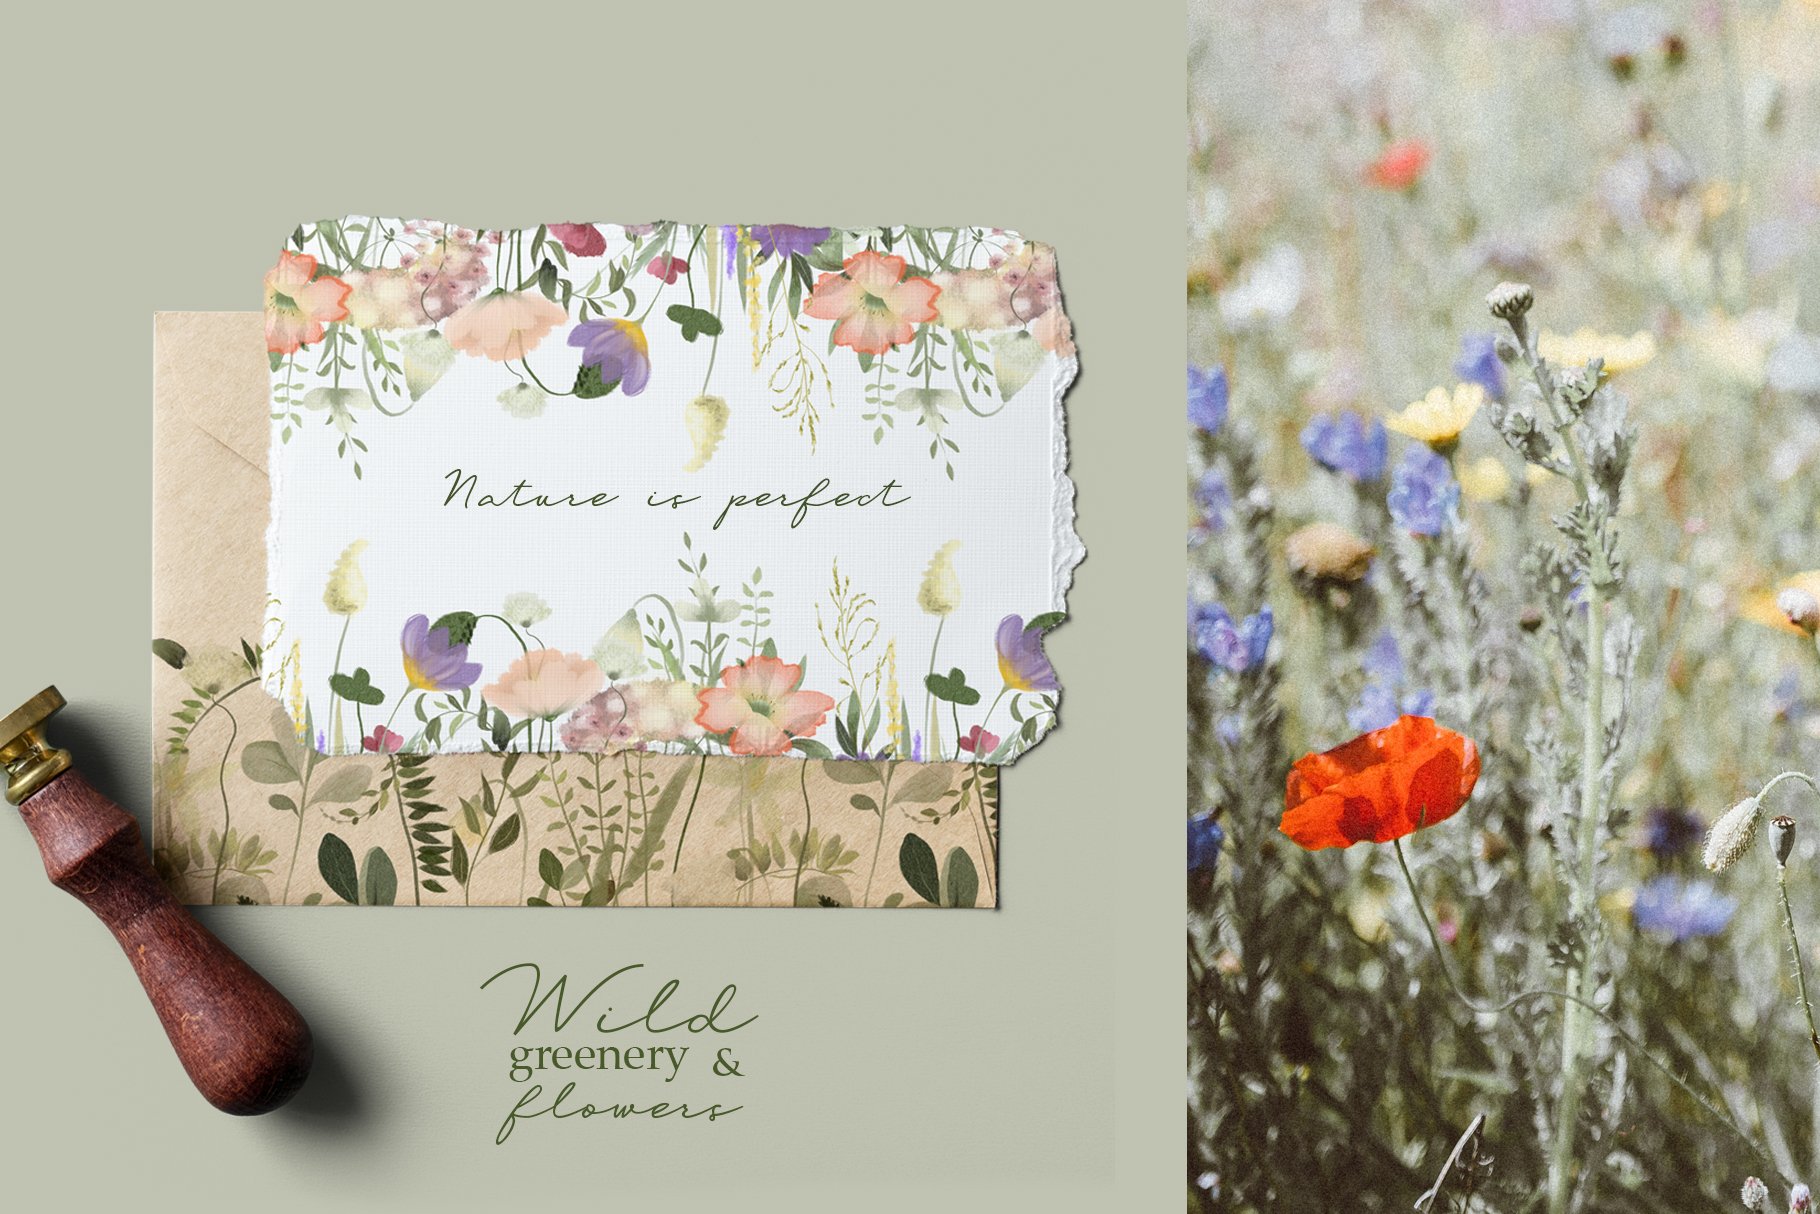 So delicate greeting card with wild flowers.